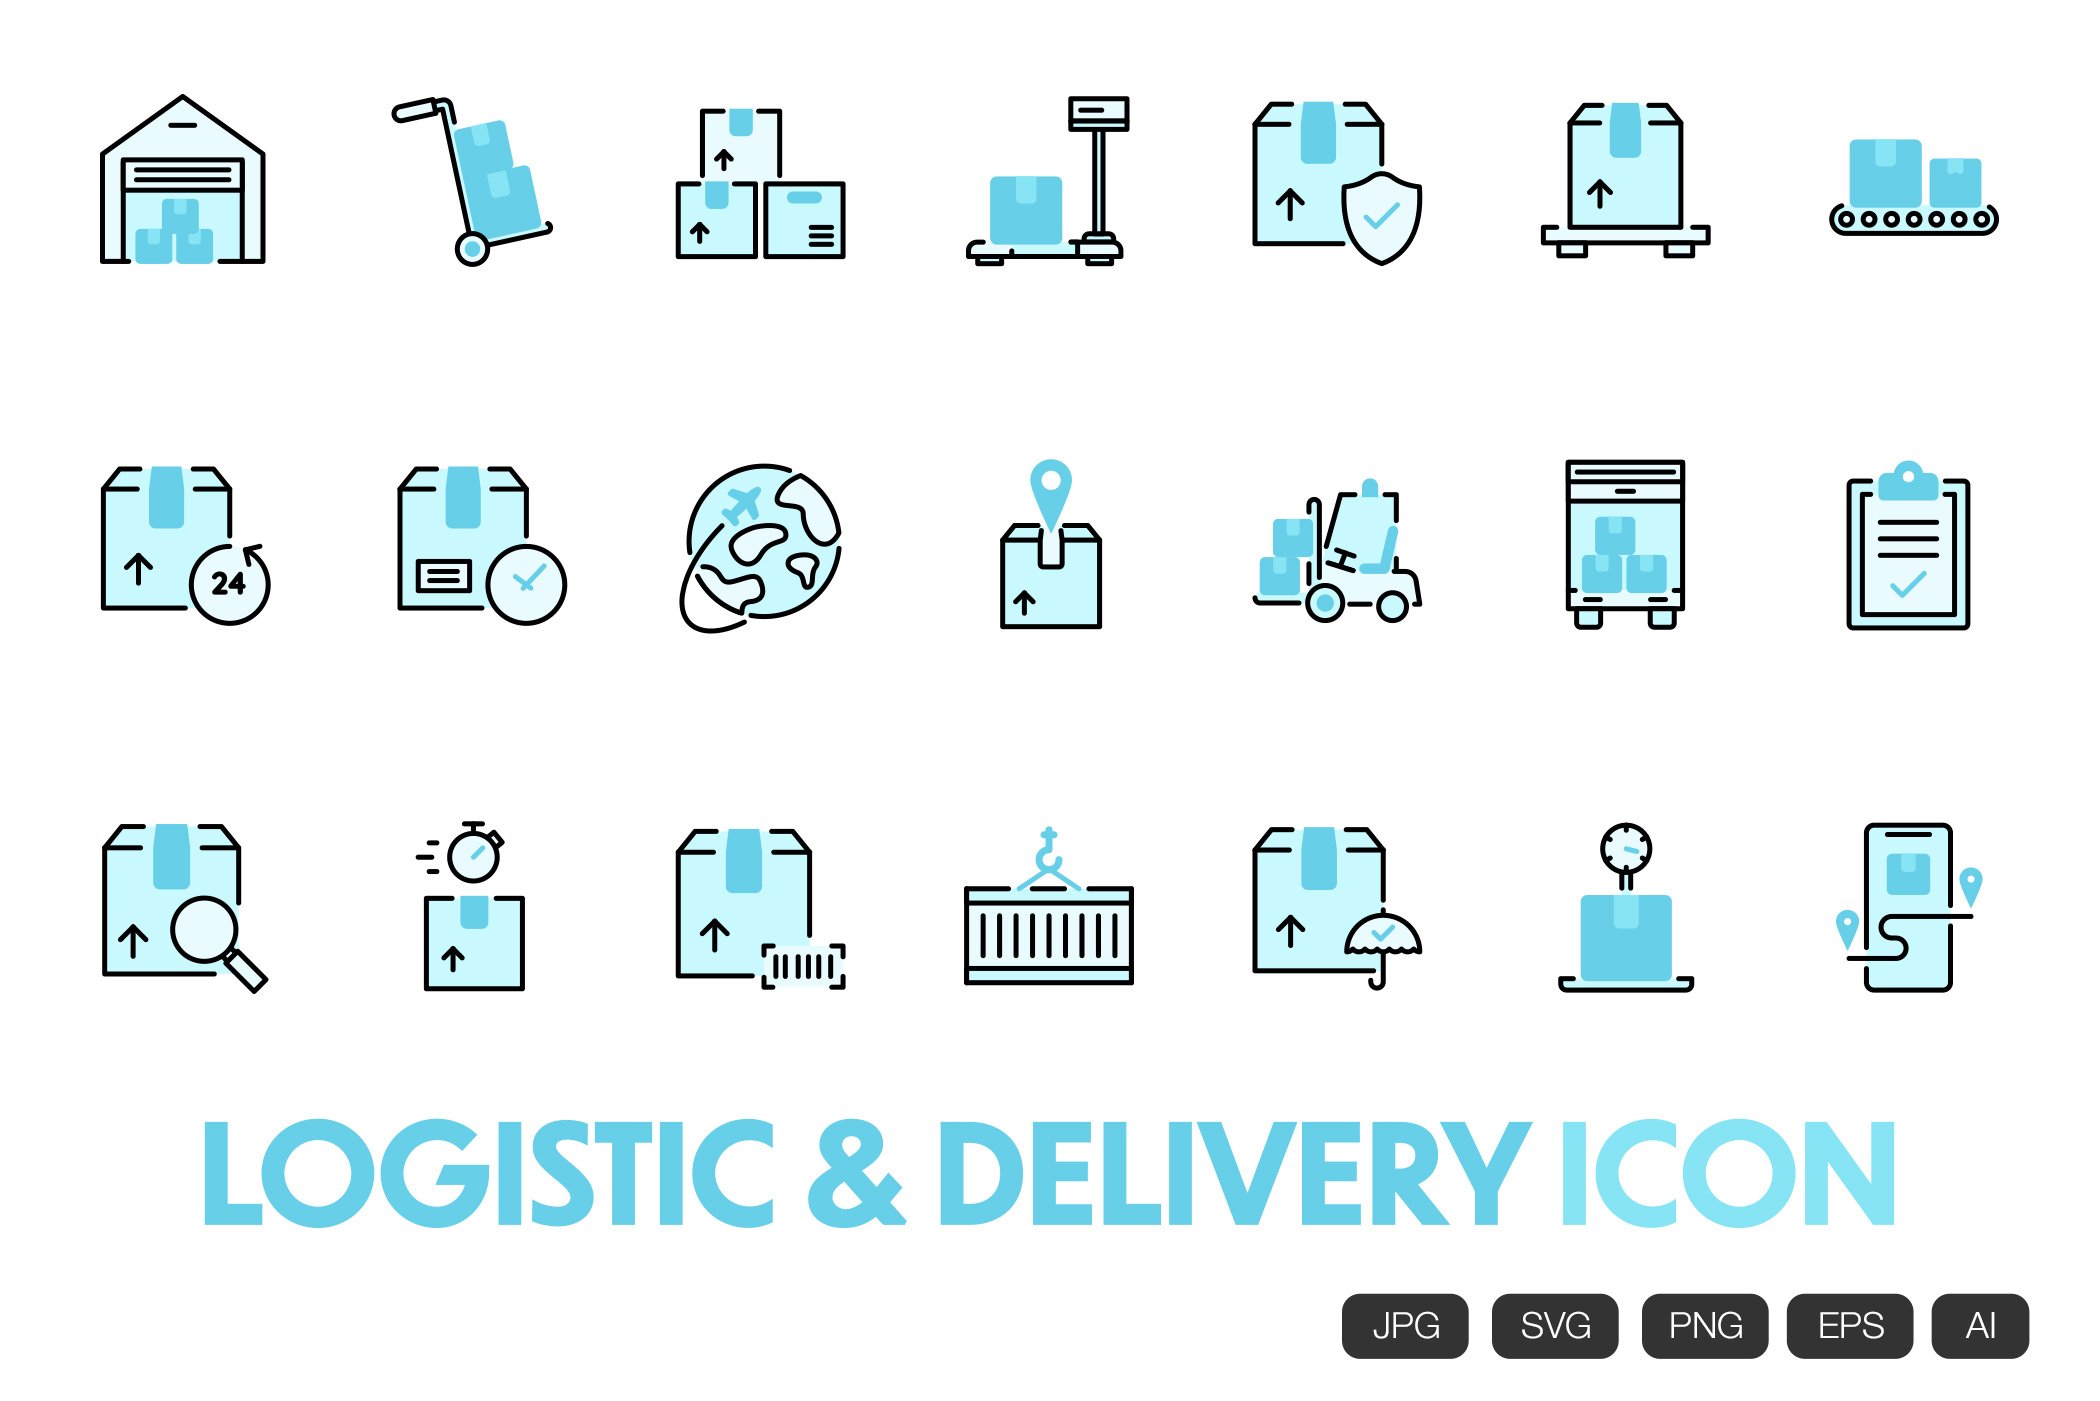 21 Logistic & Delivery Icon cover image.